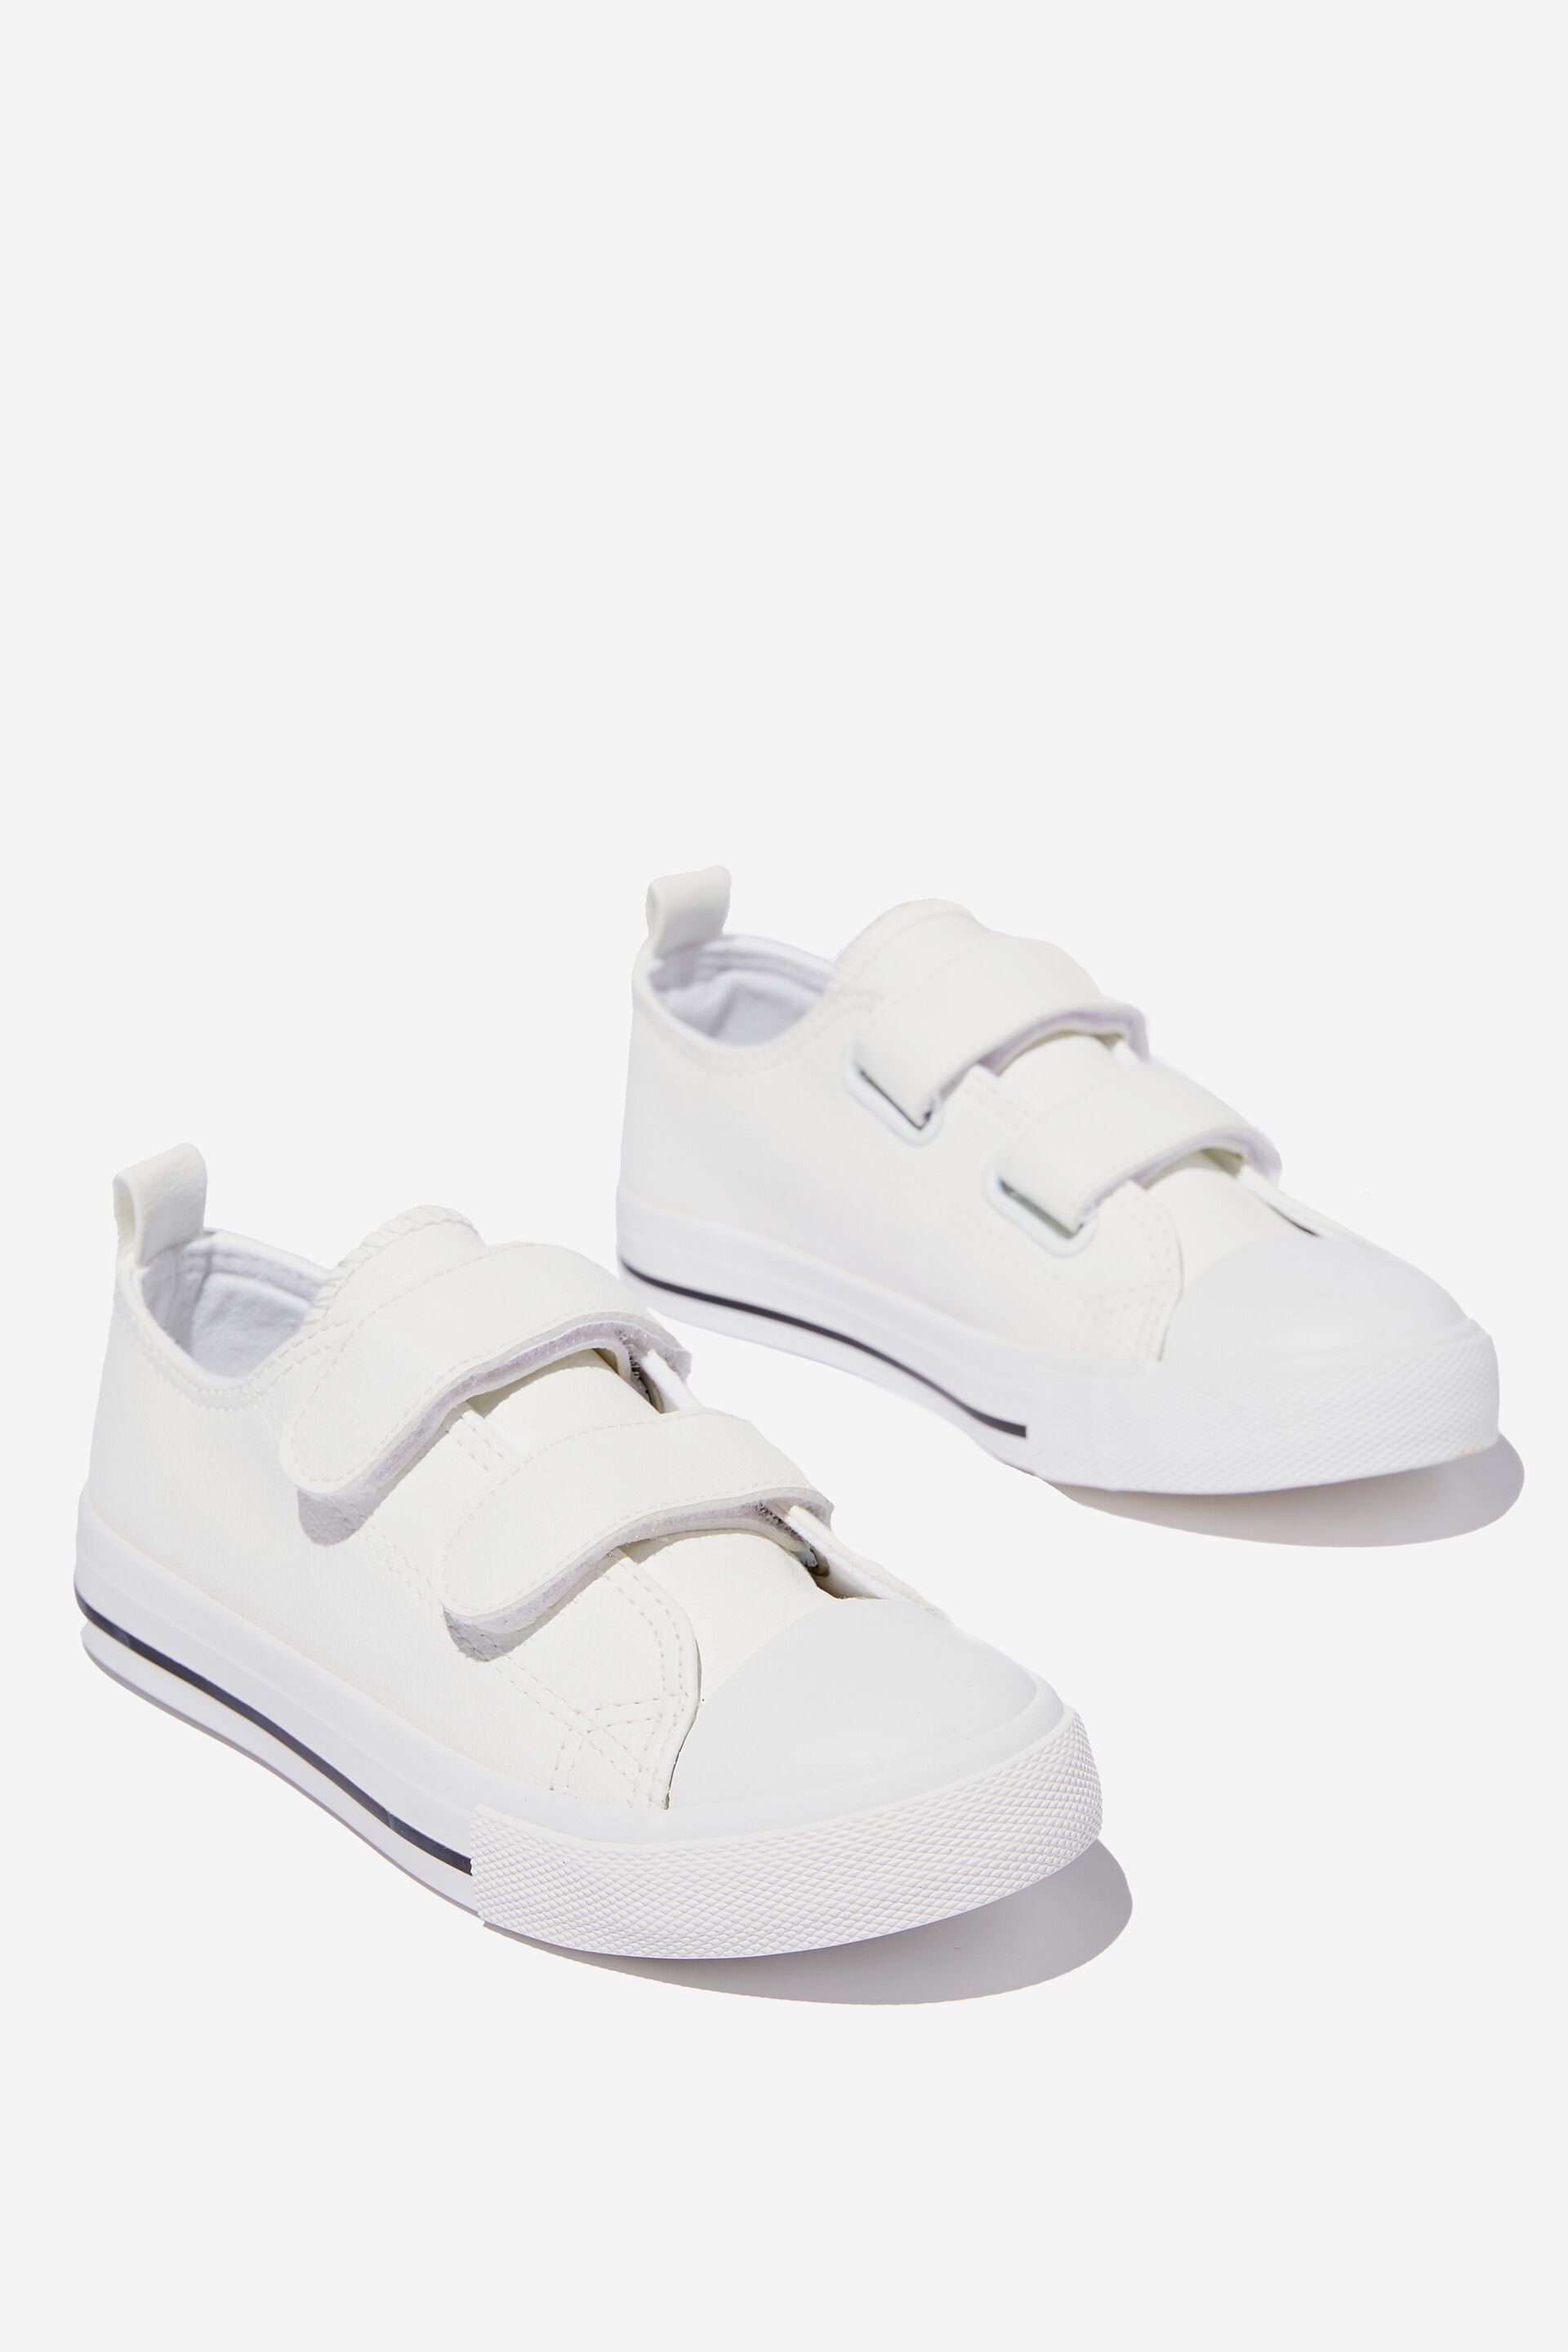 Shoes & Accessories Sneakers | Classic Double Strap Trainer - DD34616